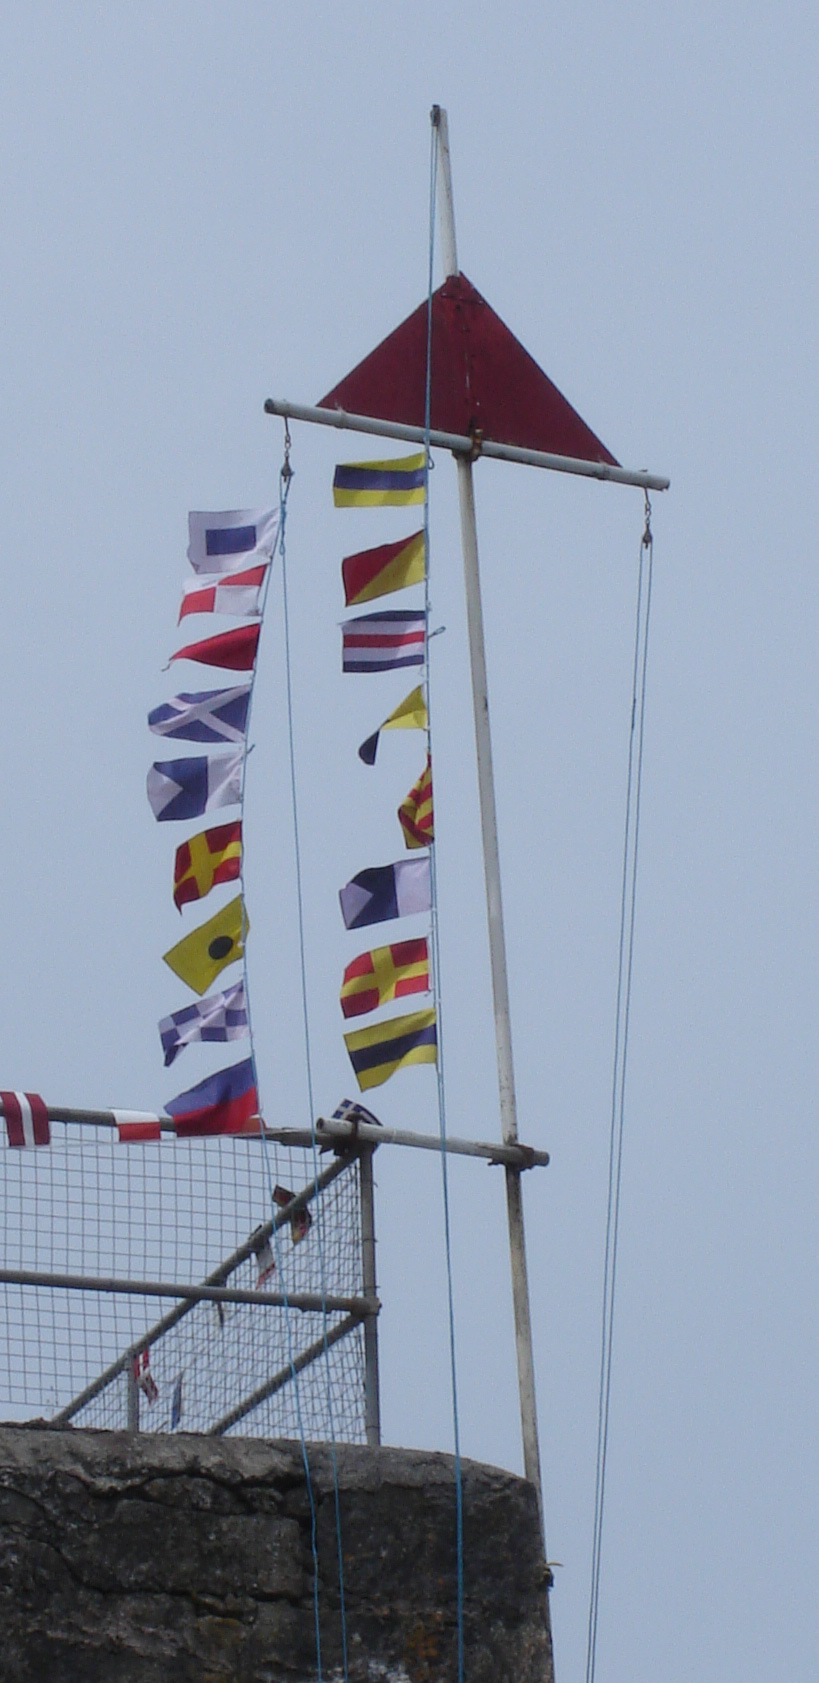 Reading maritime signal flags